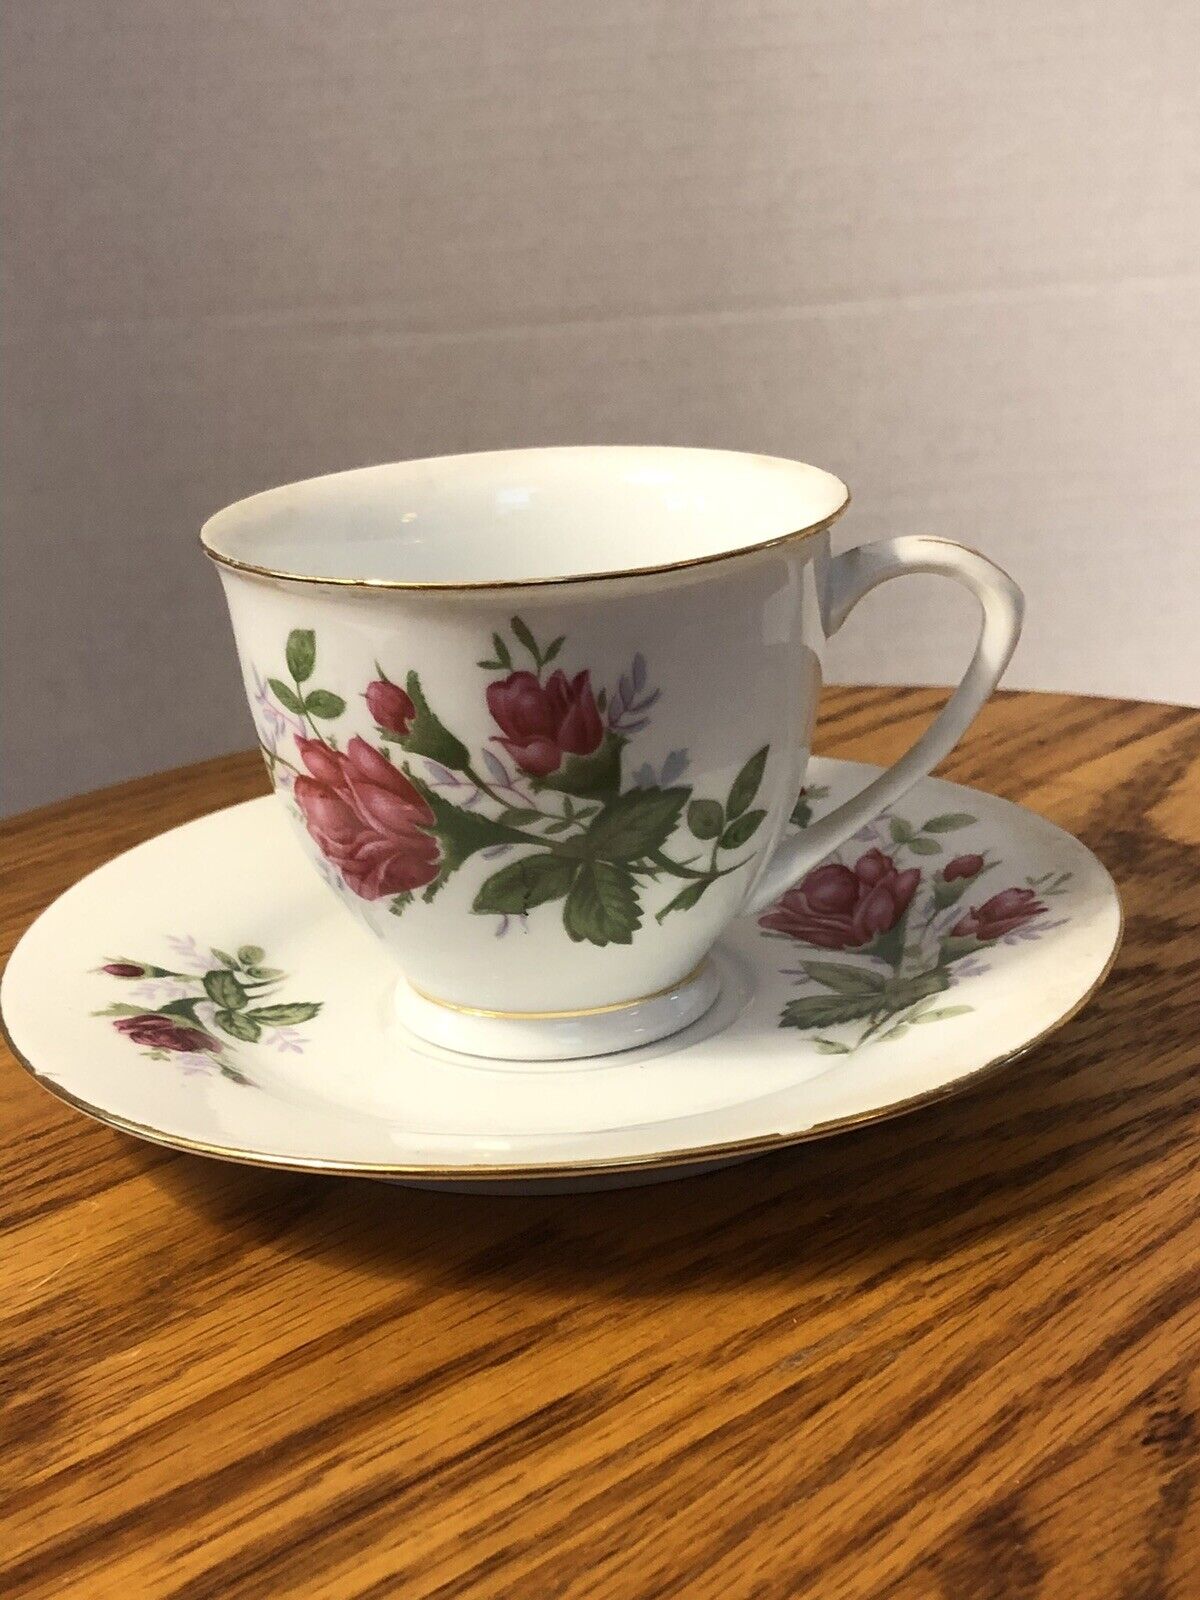 Vintage Teacup And Saucer. Made In China. Bone China.